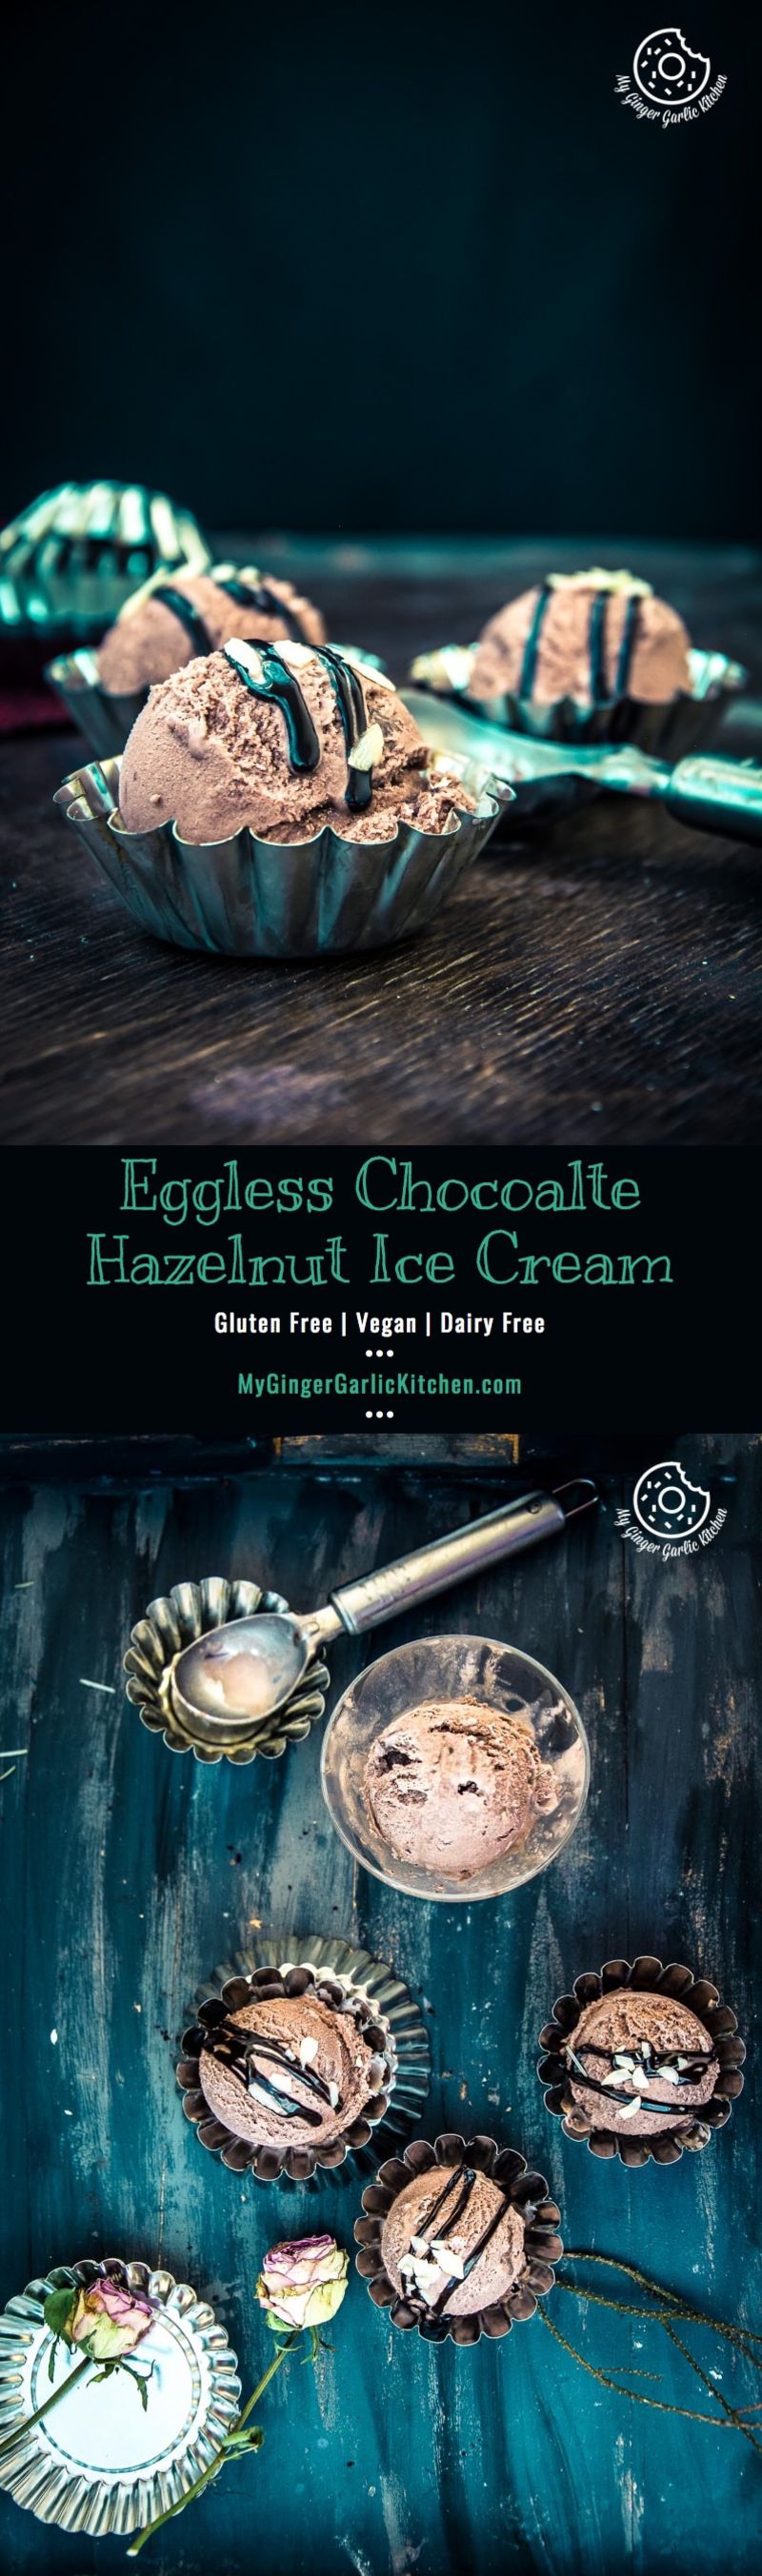 two pictures of a eggless chocolate hazelnut ice cream on a table